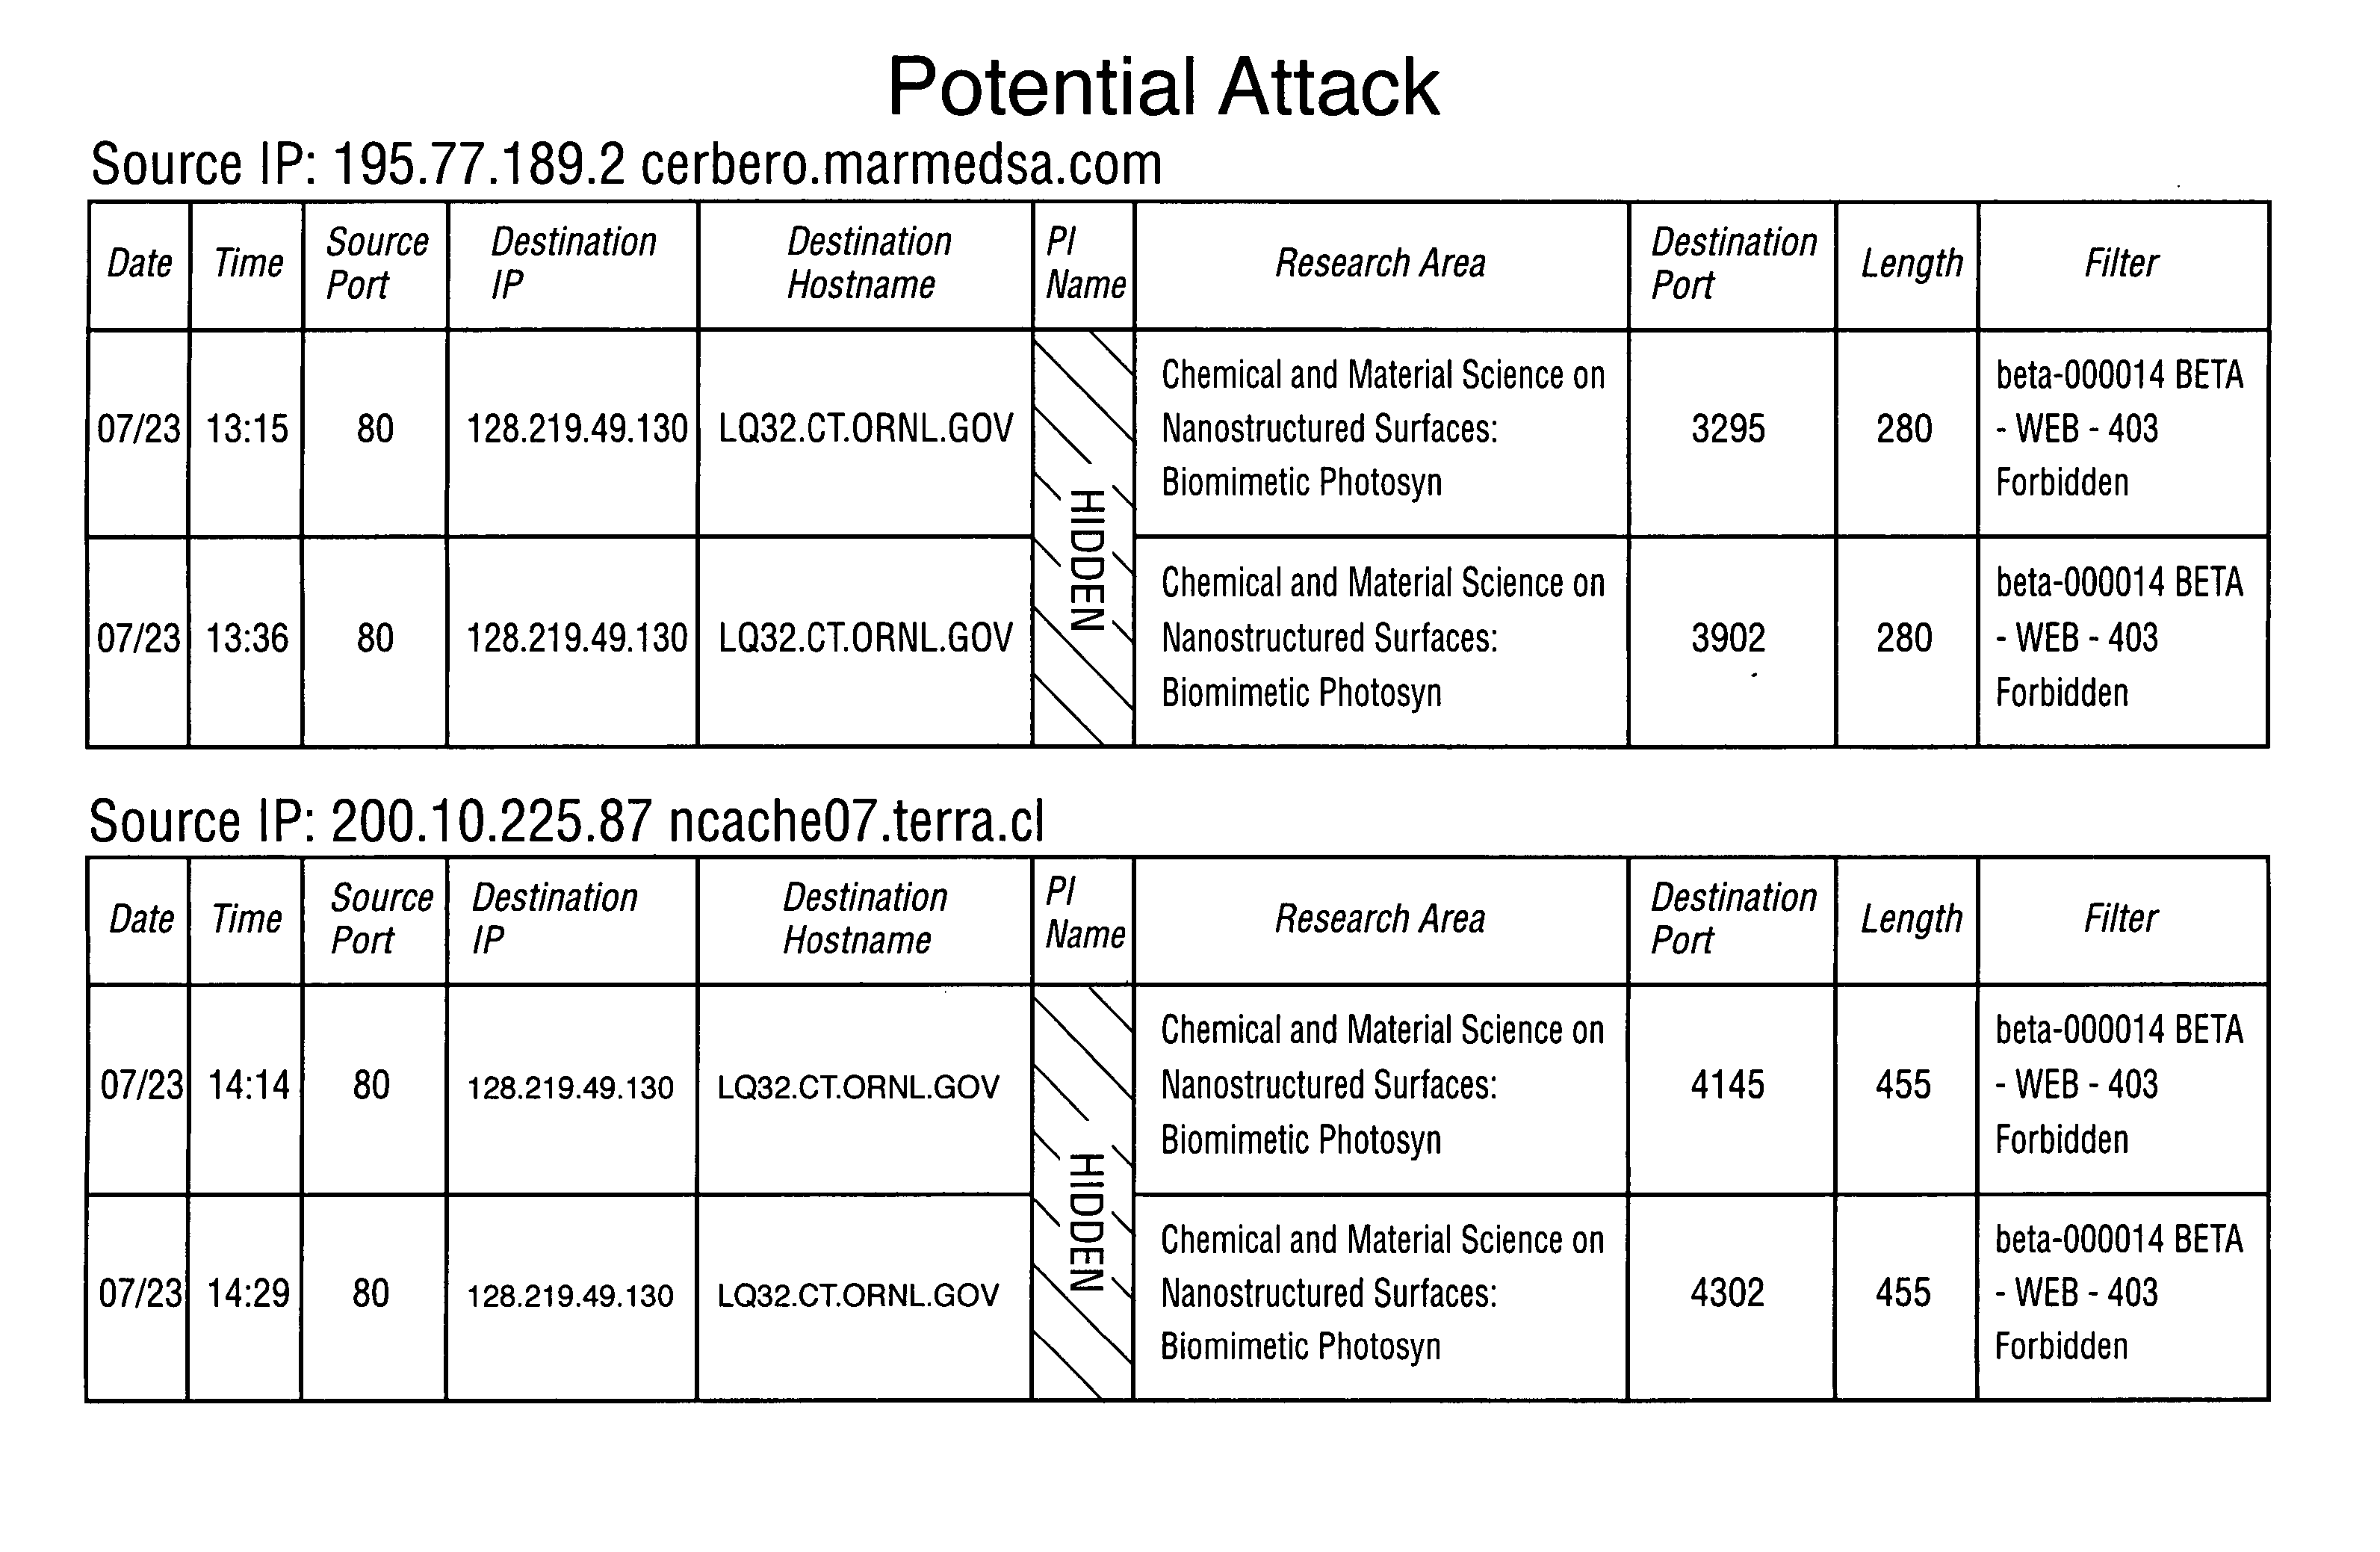 Method for detecting sophisticated cyber attacks